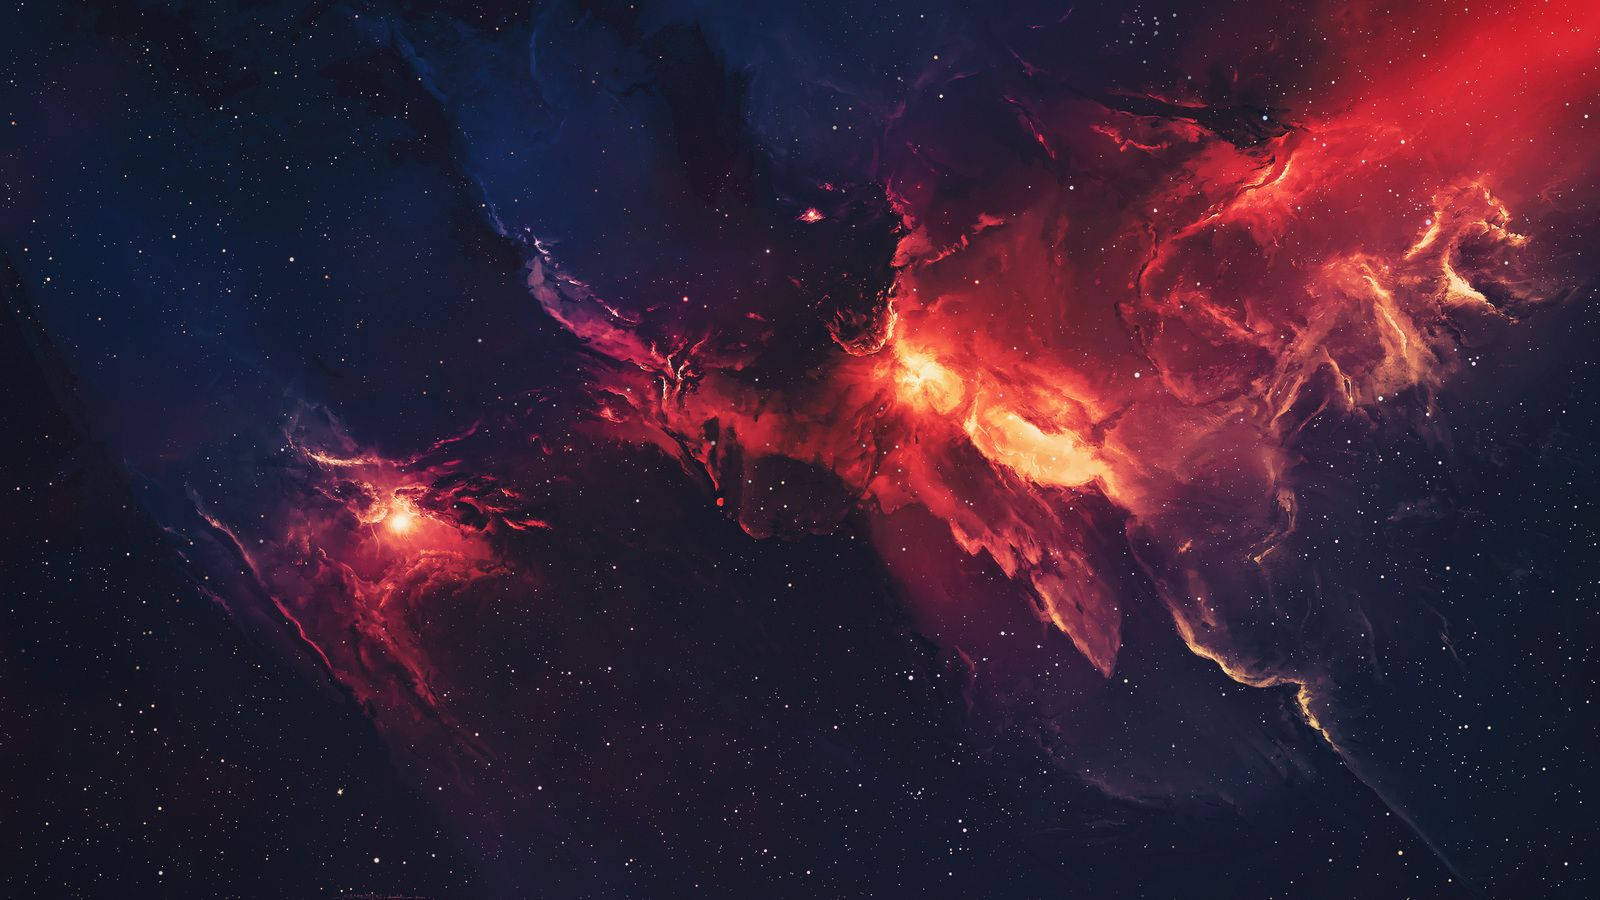 Two brilliant explosions of glowing red billow out into a spiral galaxy of stars. Wallpaper